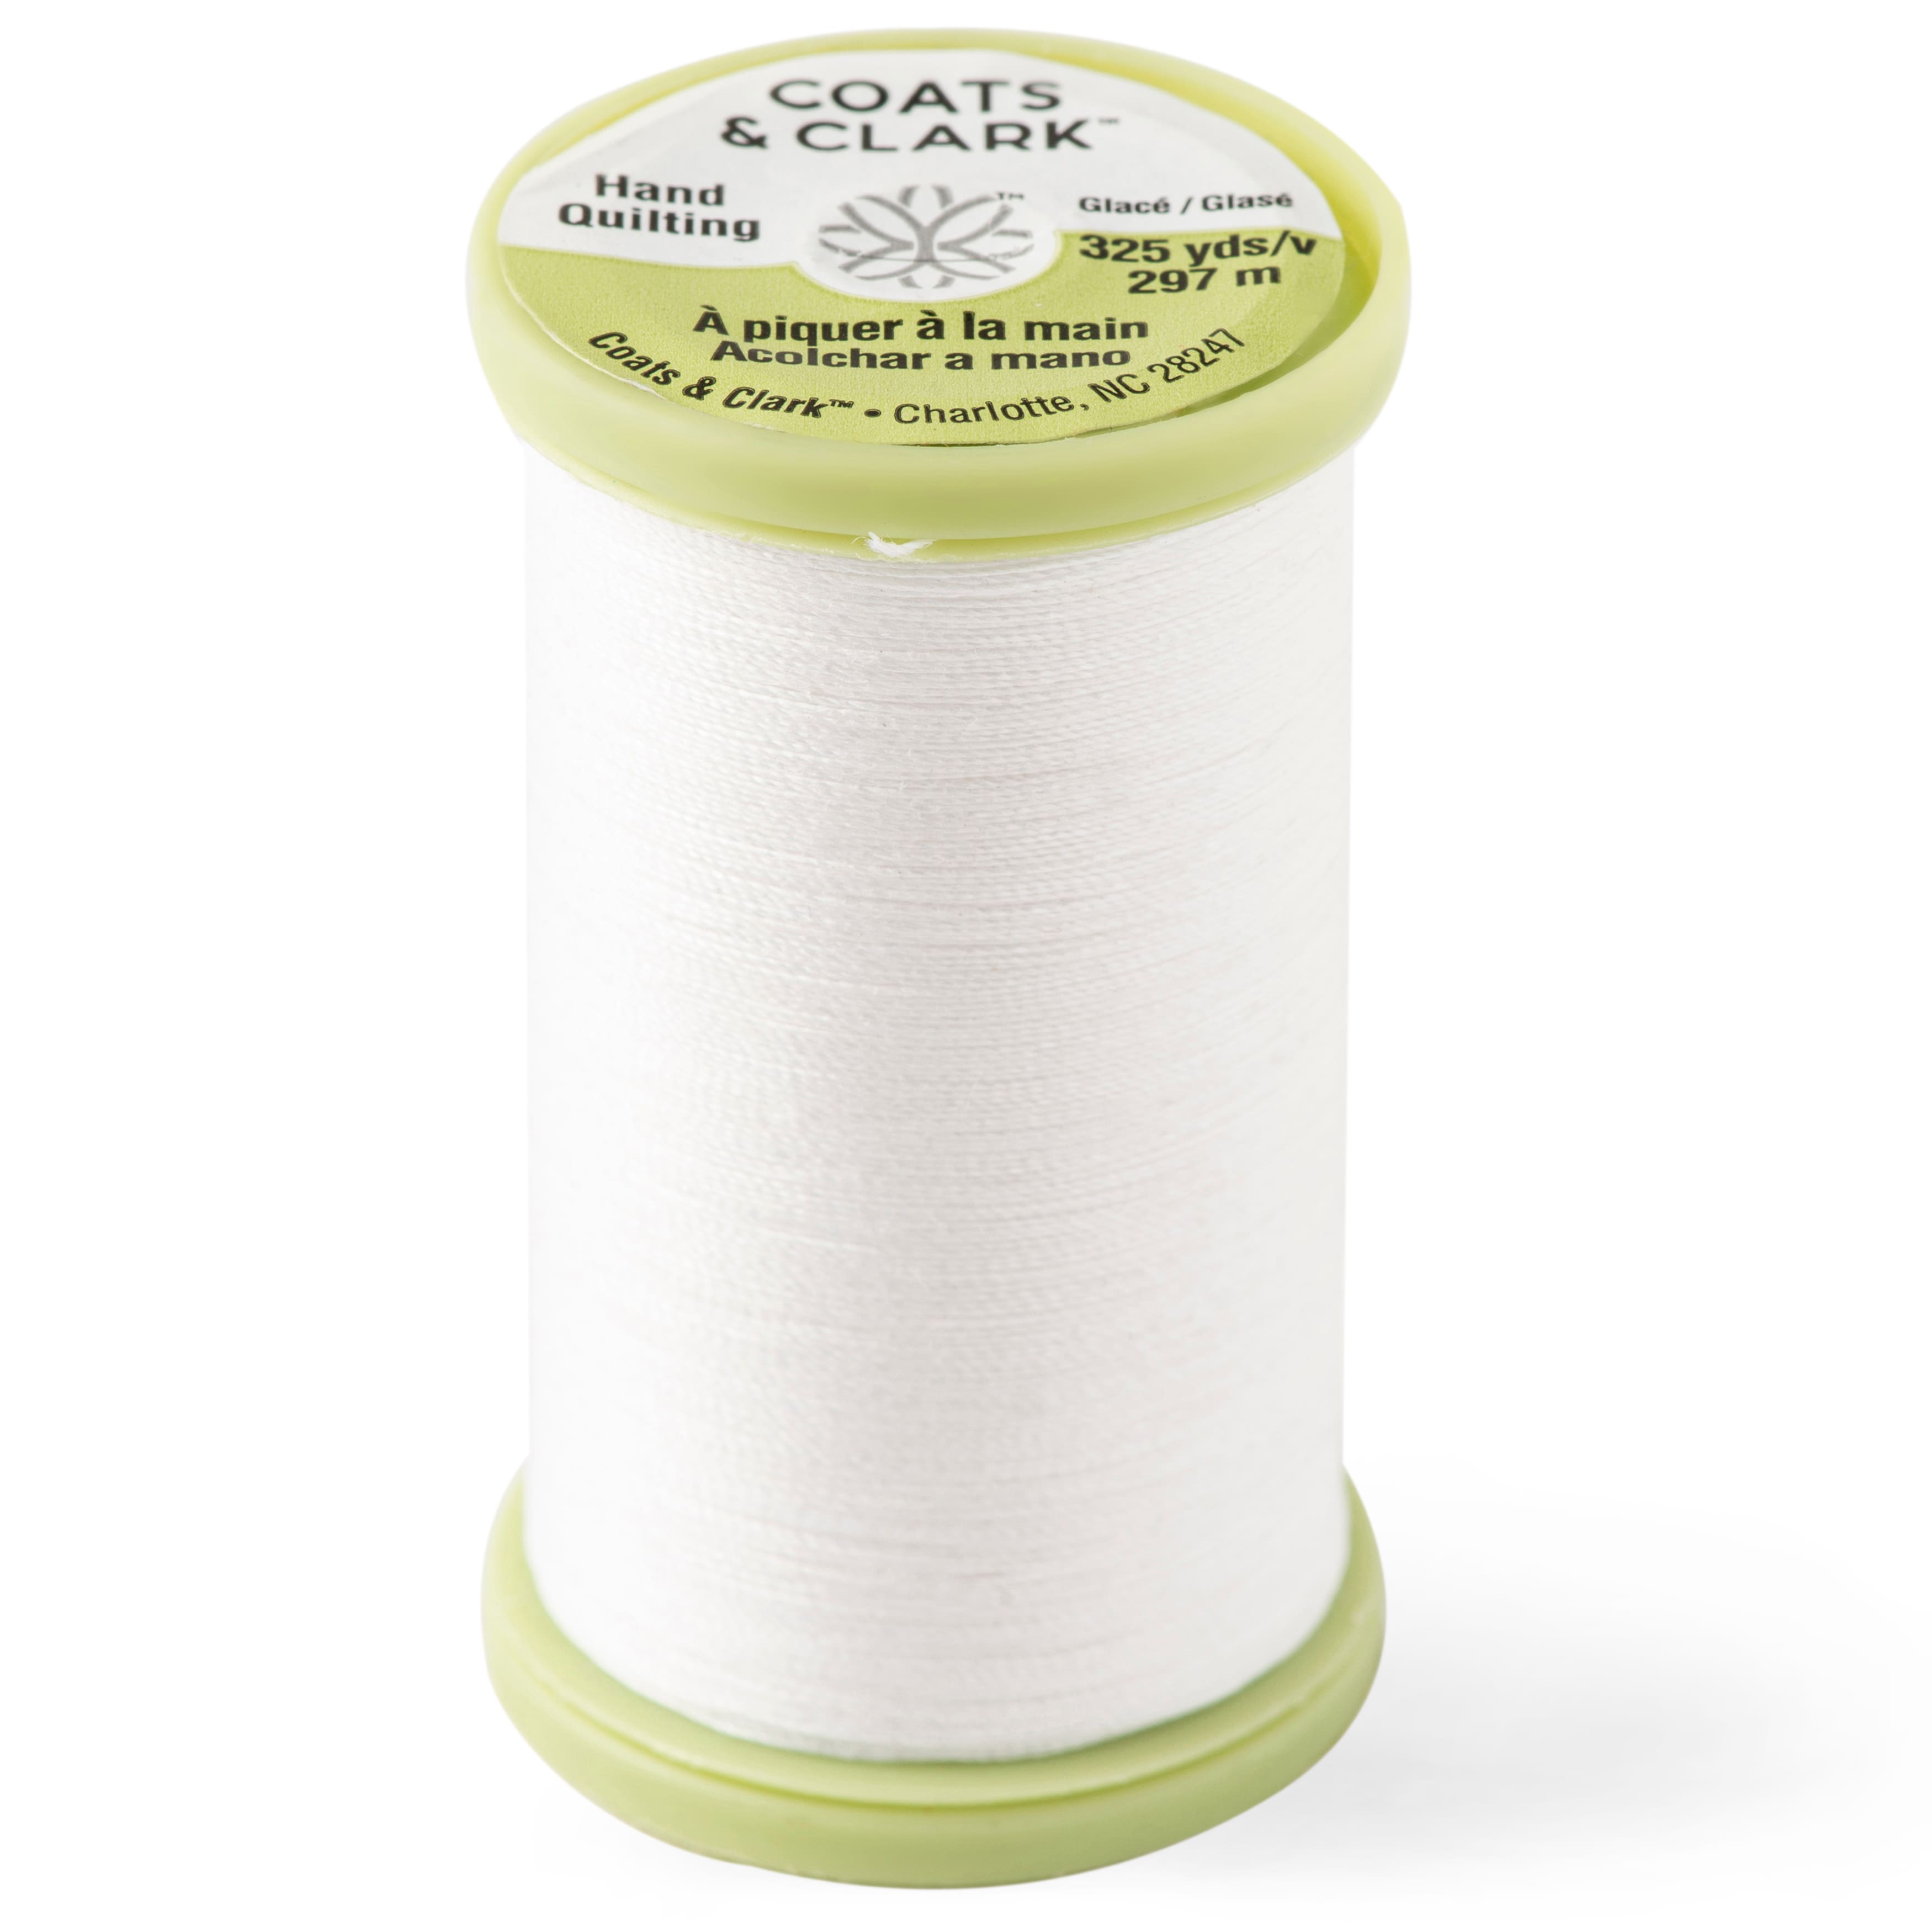 Coats Bold Hand Quilting Thread 175yd-Natural, 1 count - Kroger